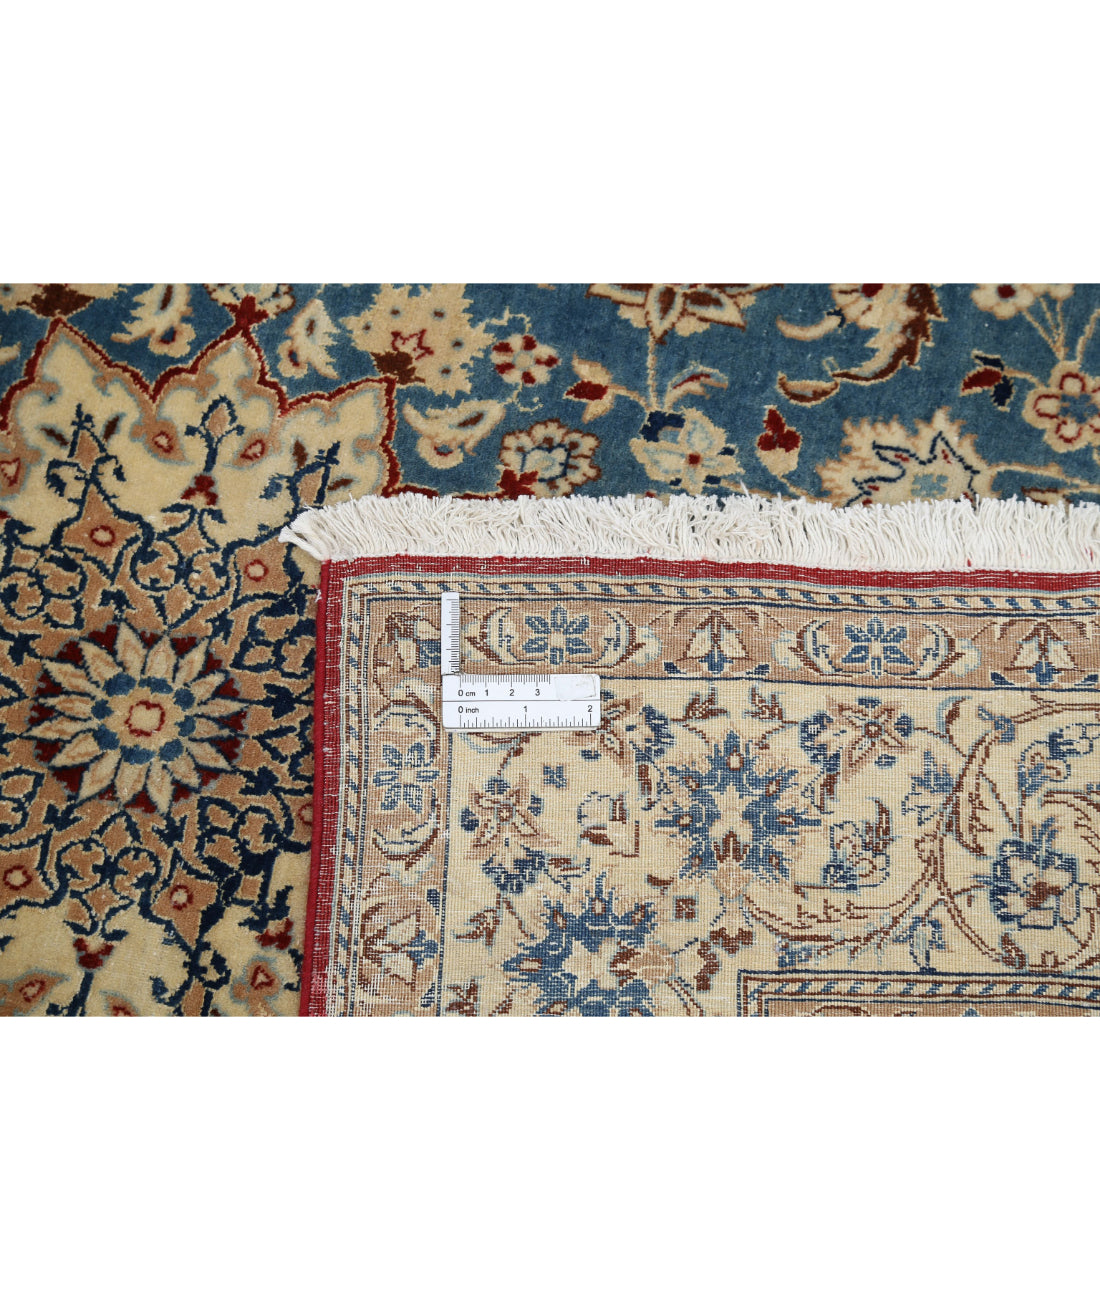 Hand Knotted Masterpiece Persian Isfahan Wool & Silk Rug - 3'5'' x 5'2'' 3'5'' x 5'2'' (103 X 155) / Blue / Ivory